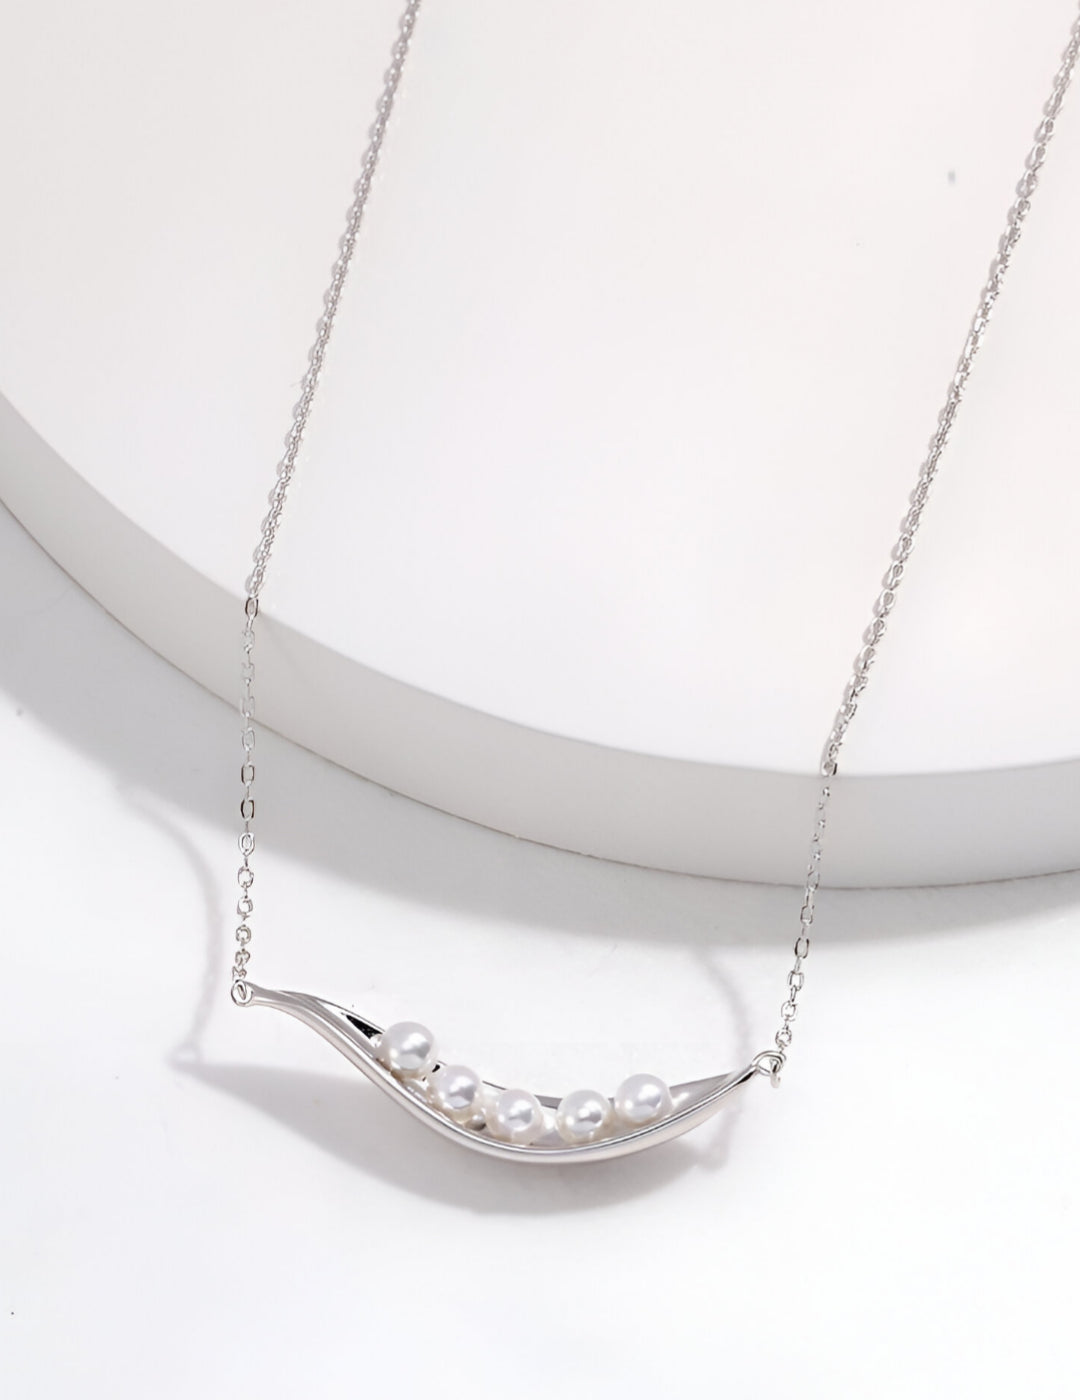 Subtitle = Boat-Inspired Necklace with Lustrous Pearls - S925 Sterling Silver with 18K Gold Vermeil  - Pearl Luminance - Feel the gentle ocean breeze with every wear